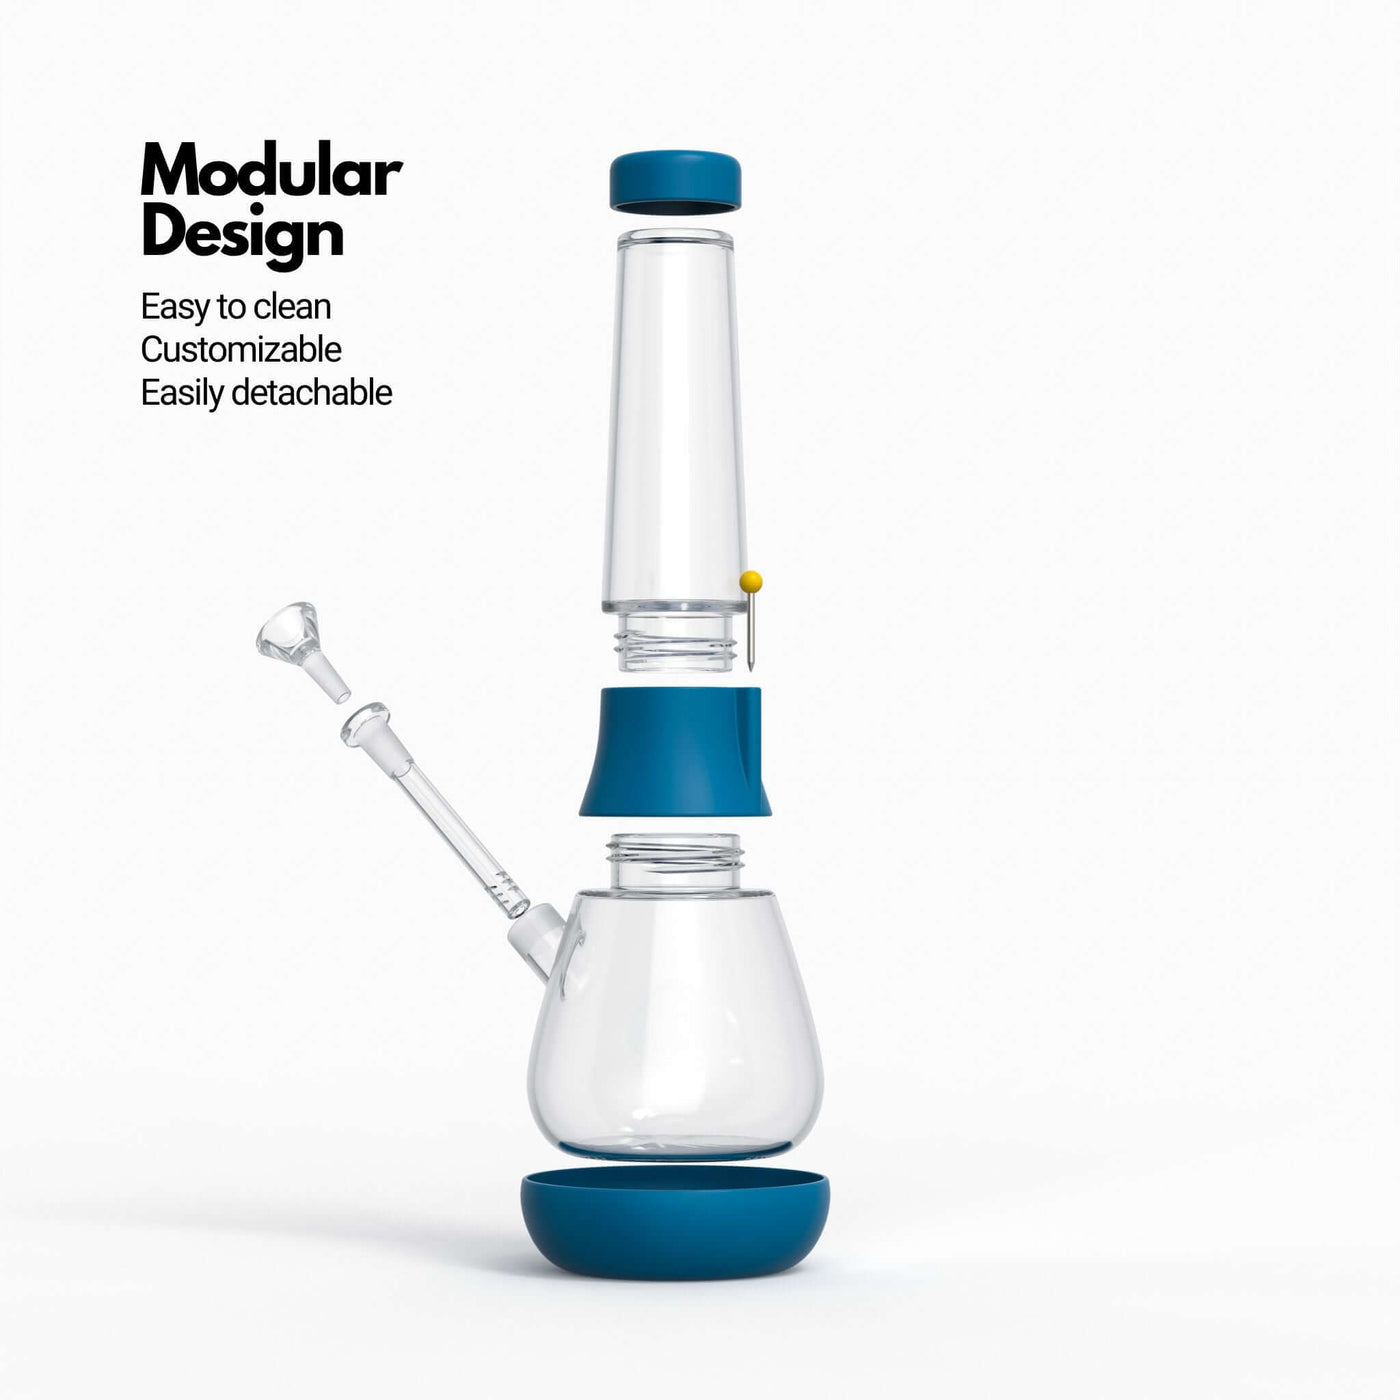 Exploded view infographic of Weeday modular bong (in midnight blue color), highlighting its customizable and detachable features.